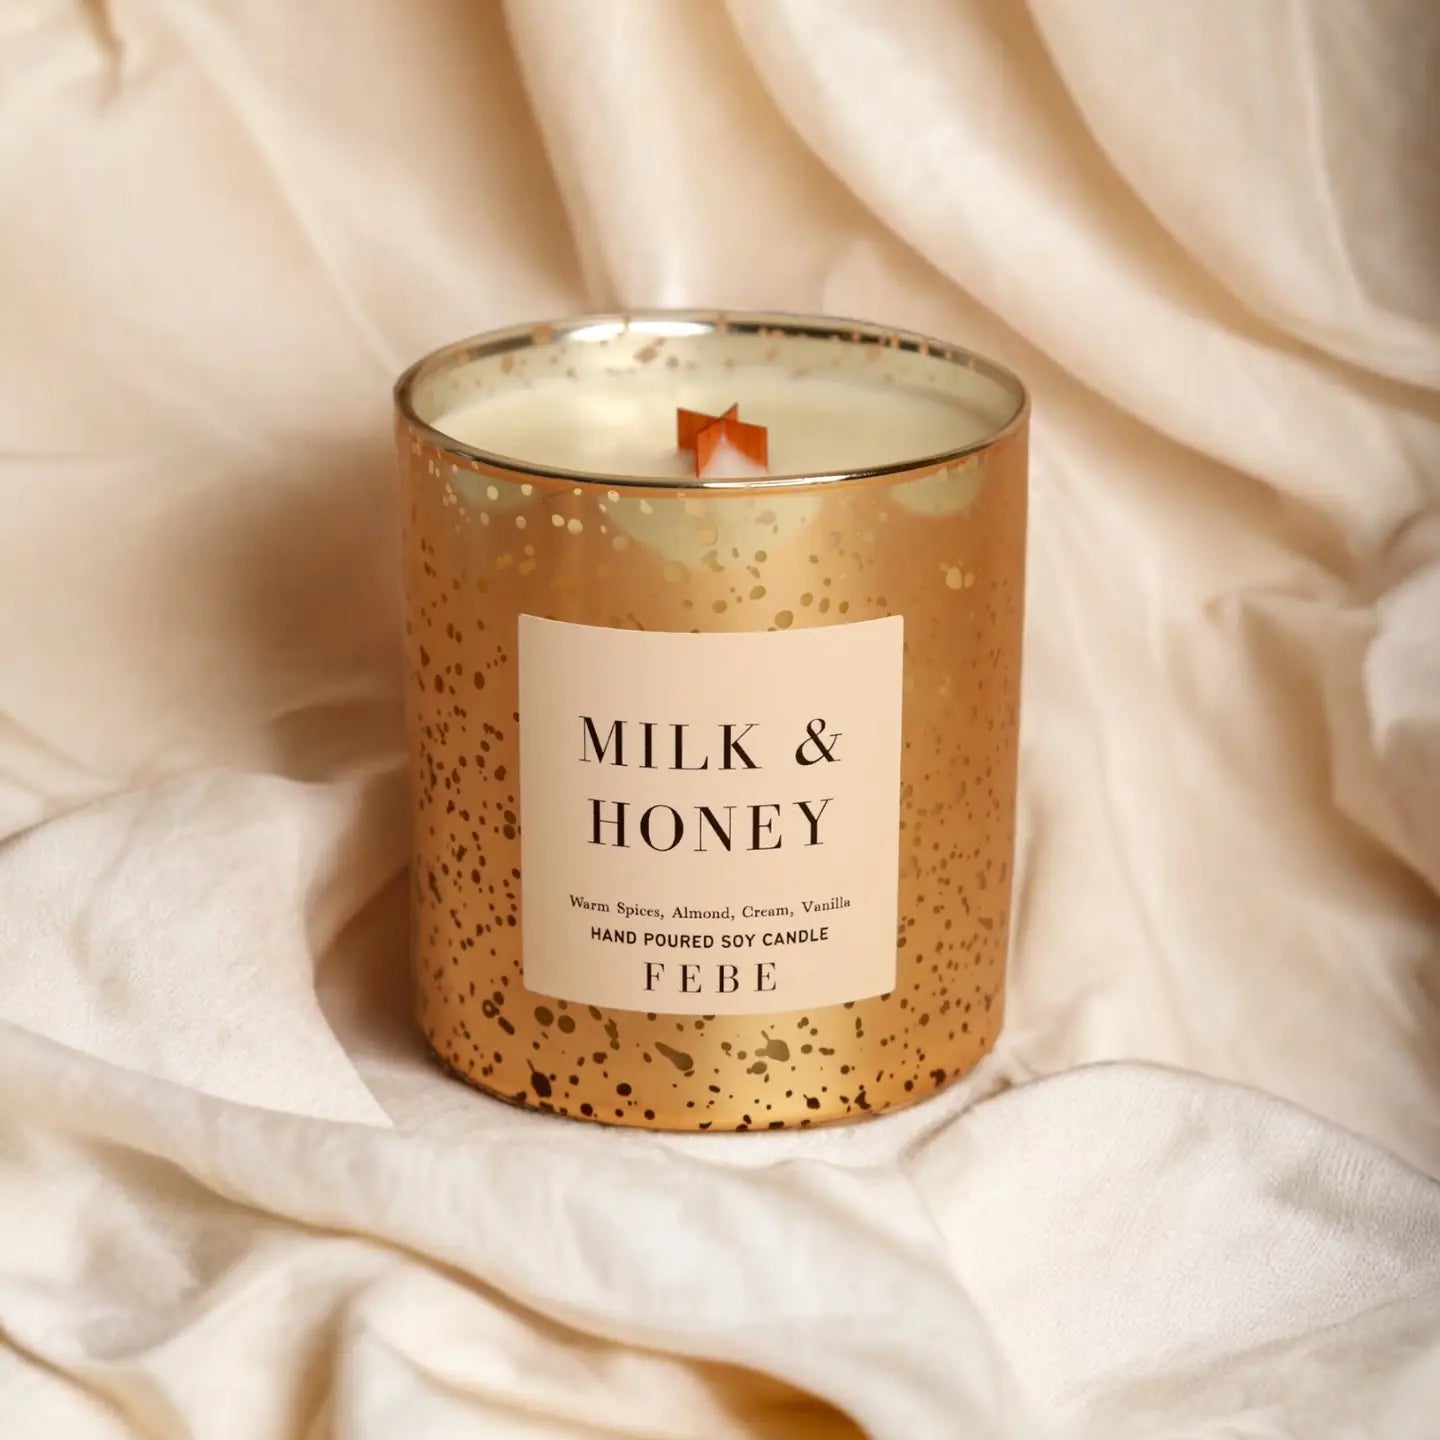 A FEBE candle labeled &quot;Milk &amp; Honey&quot; in a speckled gold container, resting on a soft, wrinkled cream fabric background in Arizona style.